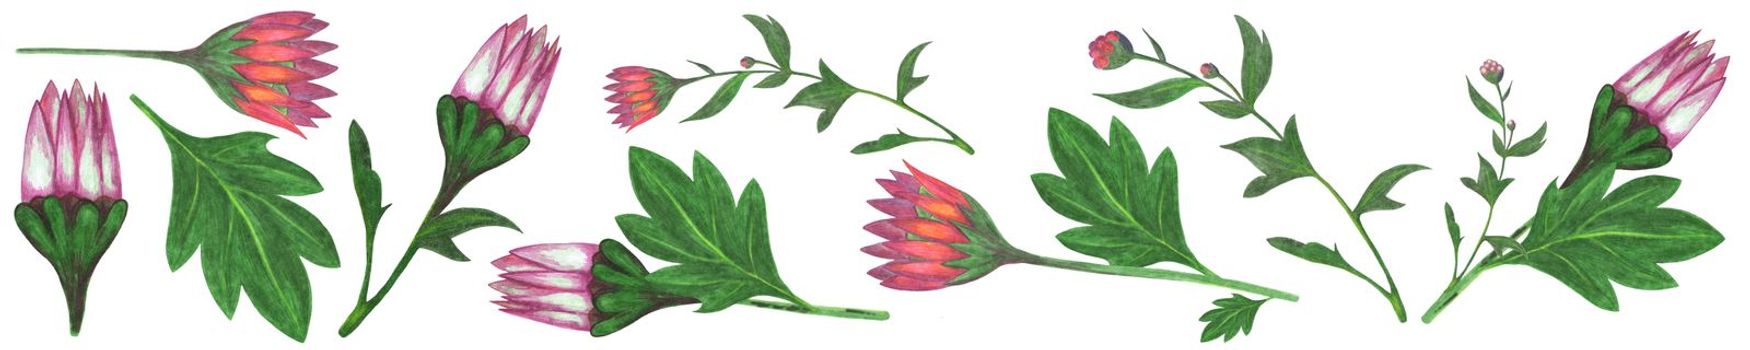 Set of Red and Pink Flowers with Green Leaves Isolated on White Background. Red and Pink Floral Element Drawn by Colored Pencil Collection.